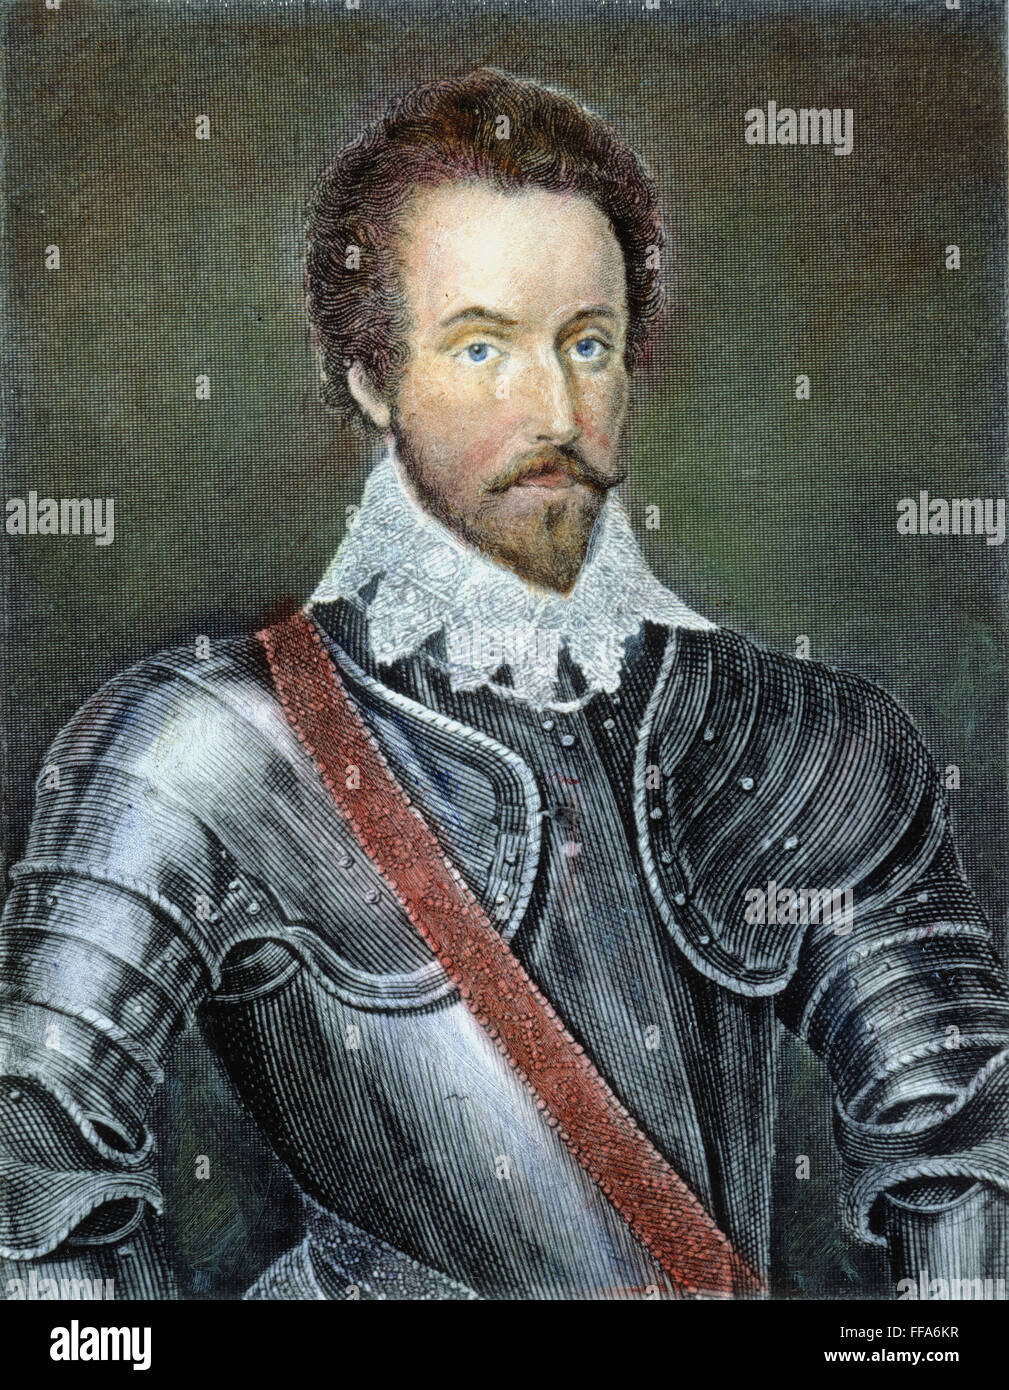 SIR WALTER RALEIGH /n(1552-1618). English adventurer, courtier, and writer. Steel engraving, English, 1830. Stock Photo